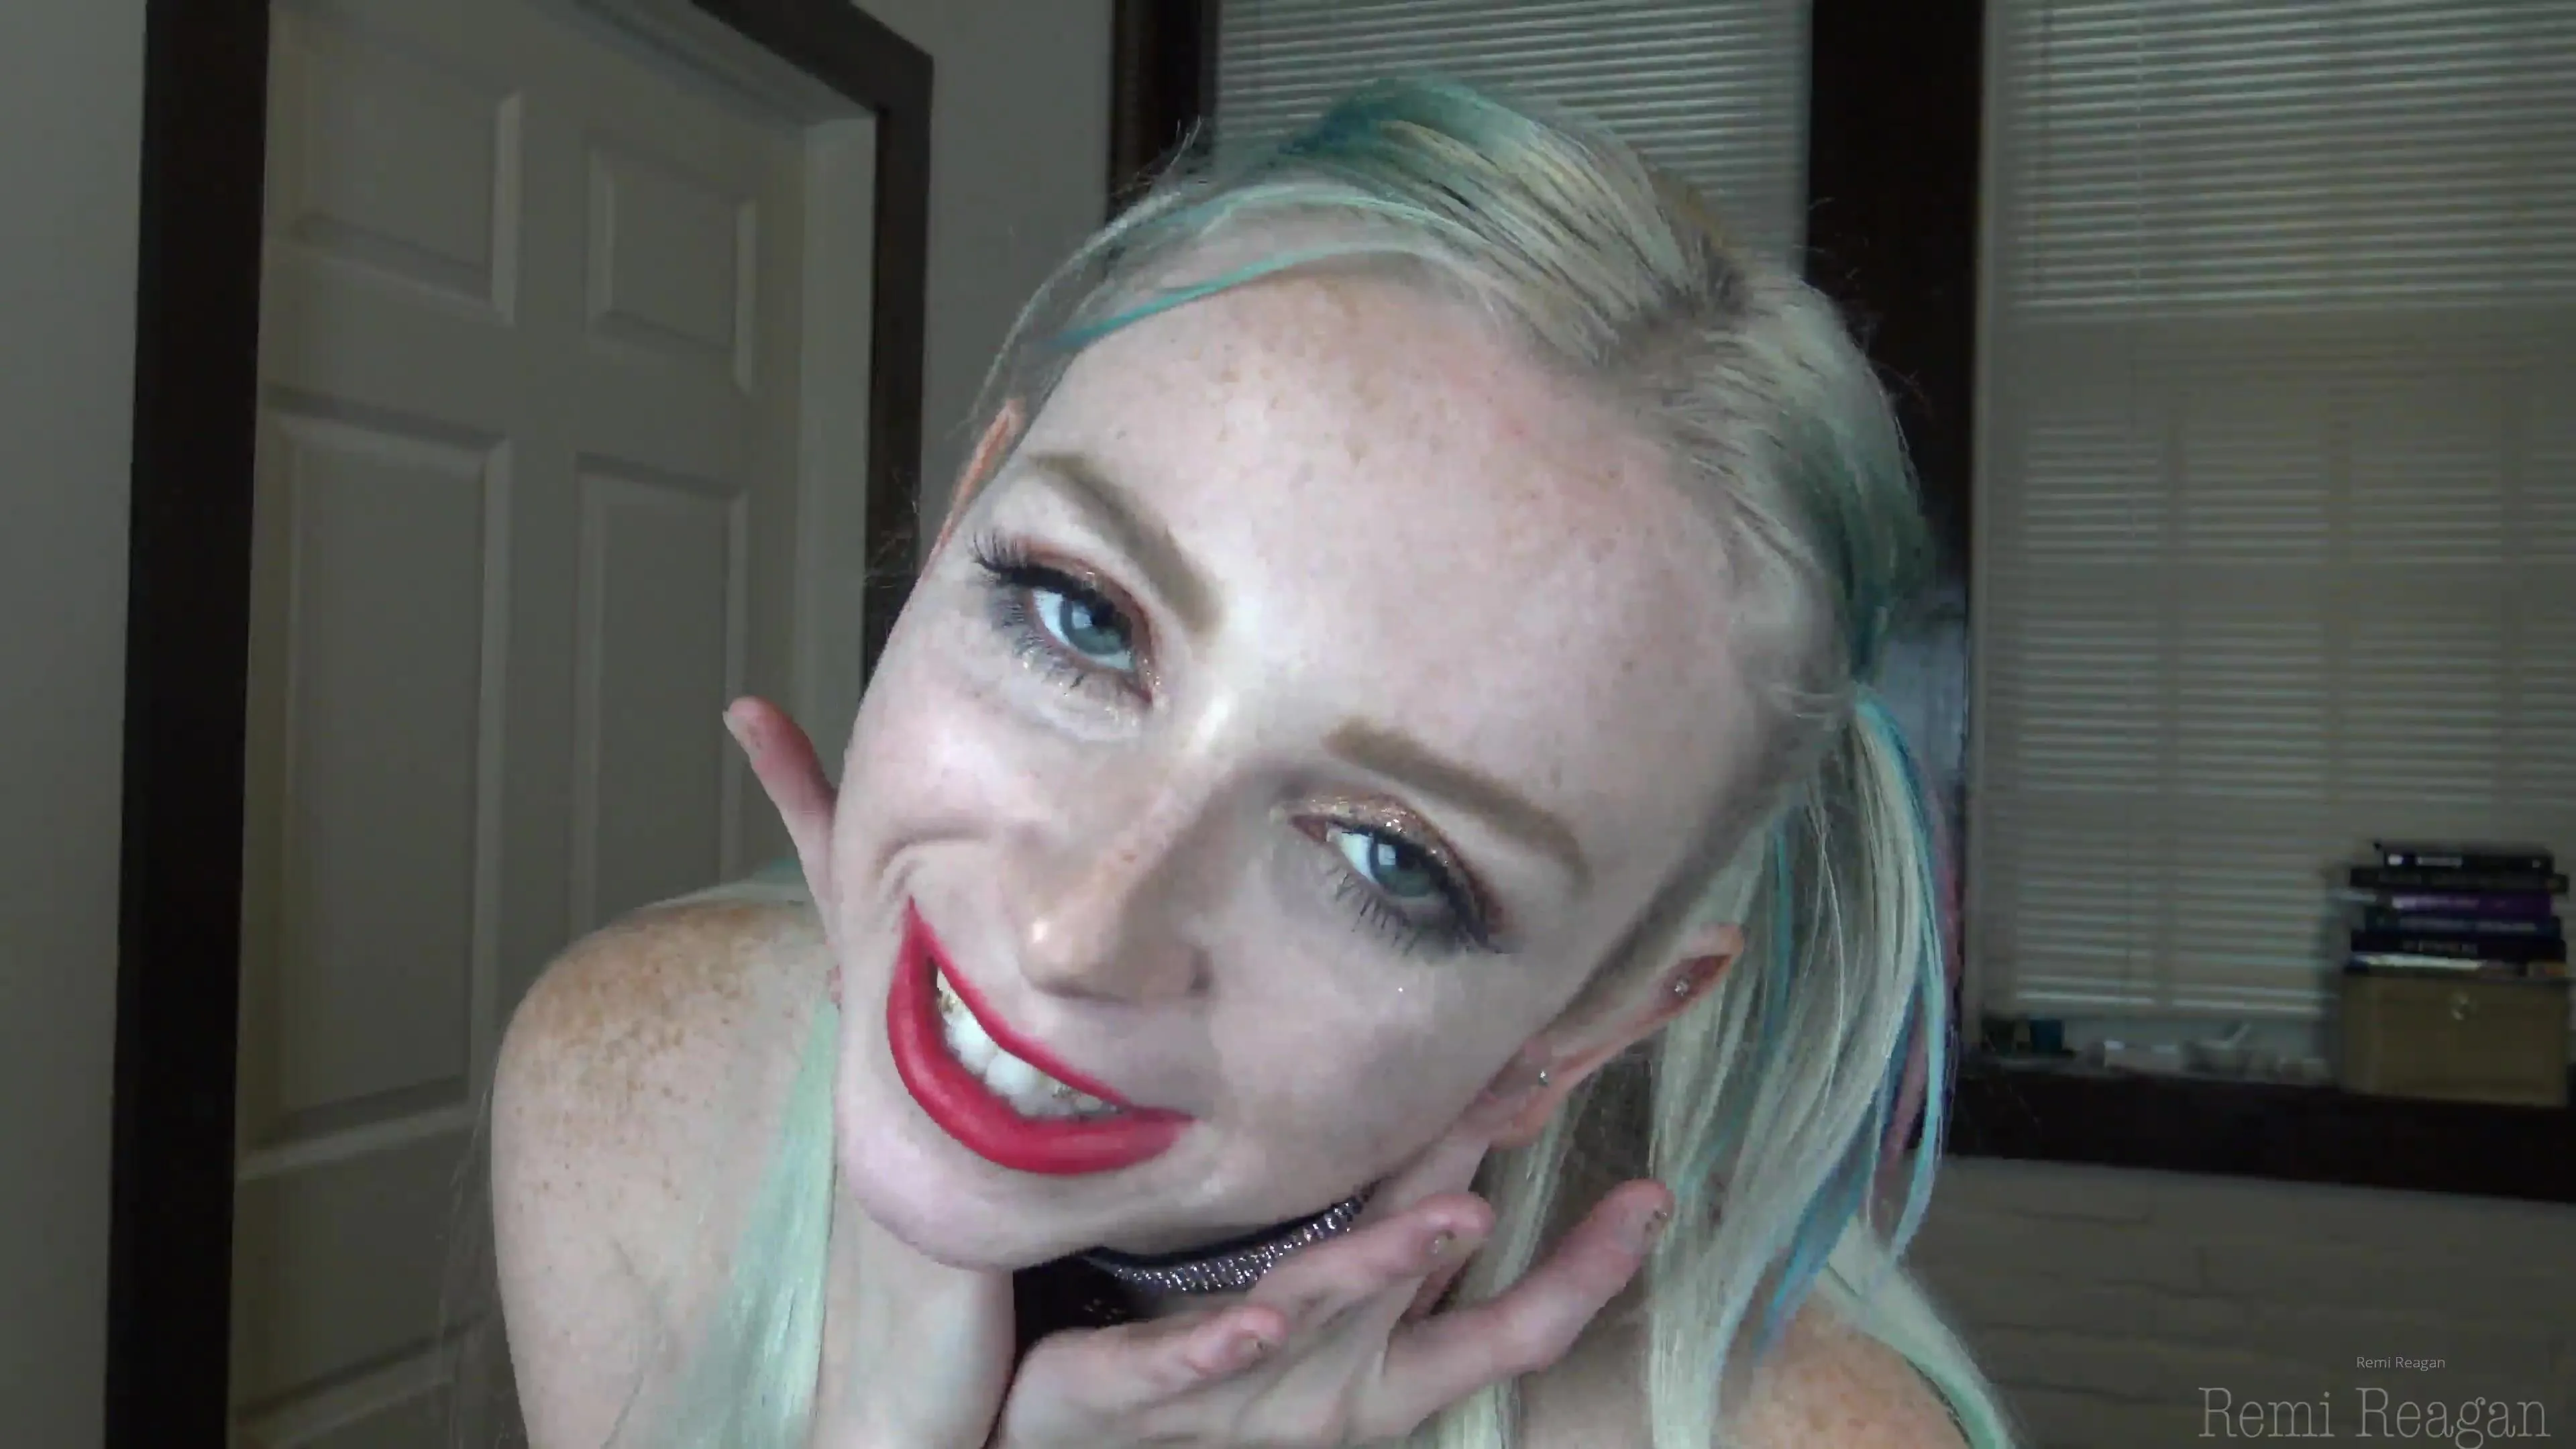 3840px x 2160px - Remireagan Full 4K Video Joi Face Fetish Harley Quinn Roleplay xxx onlyfans  porn videos